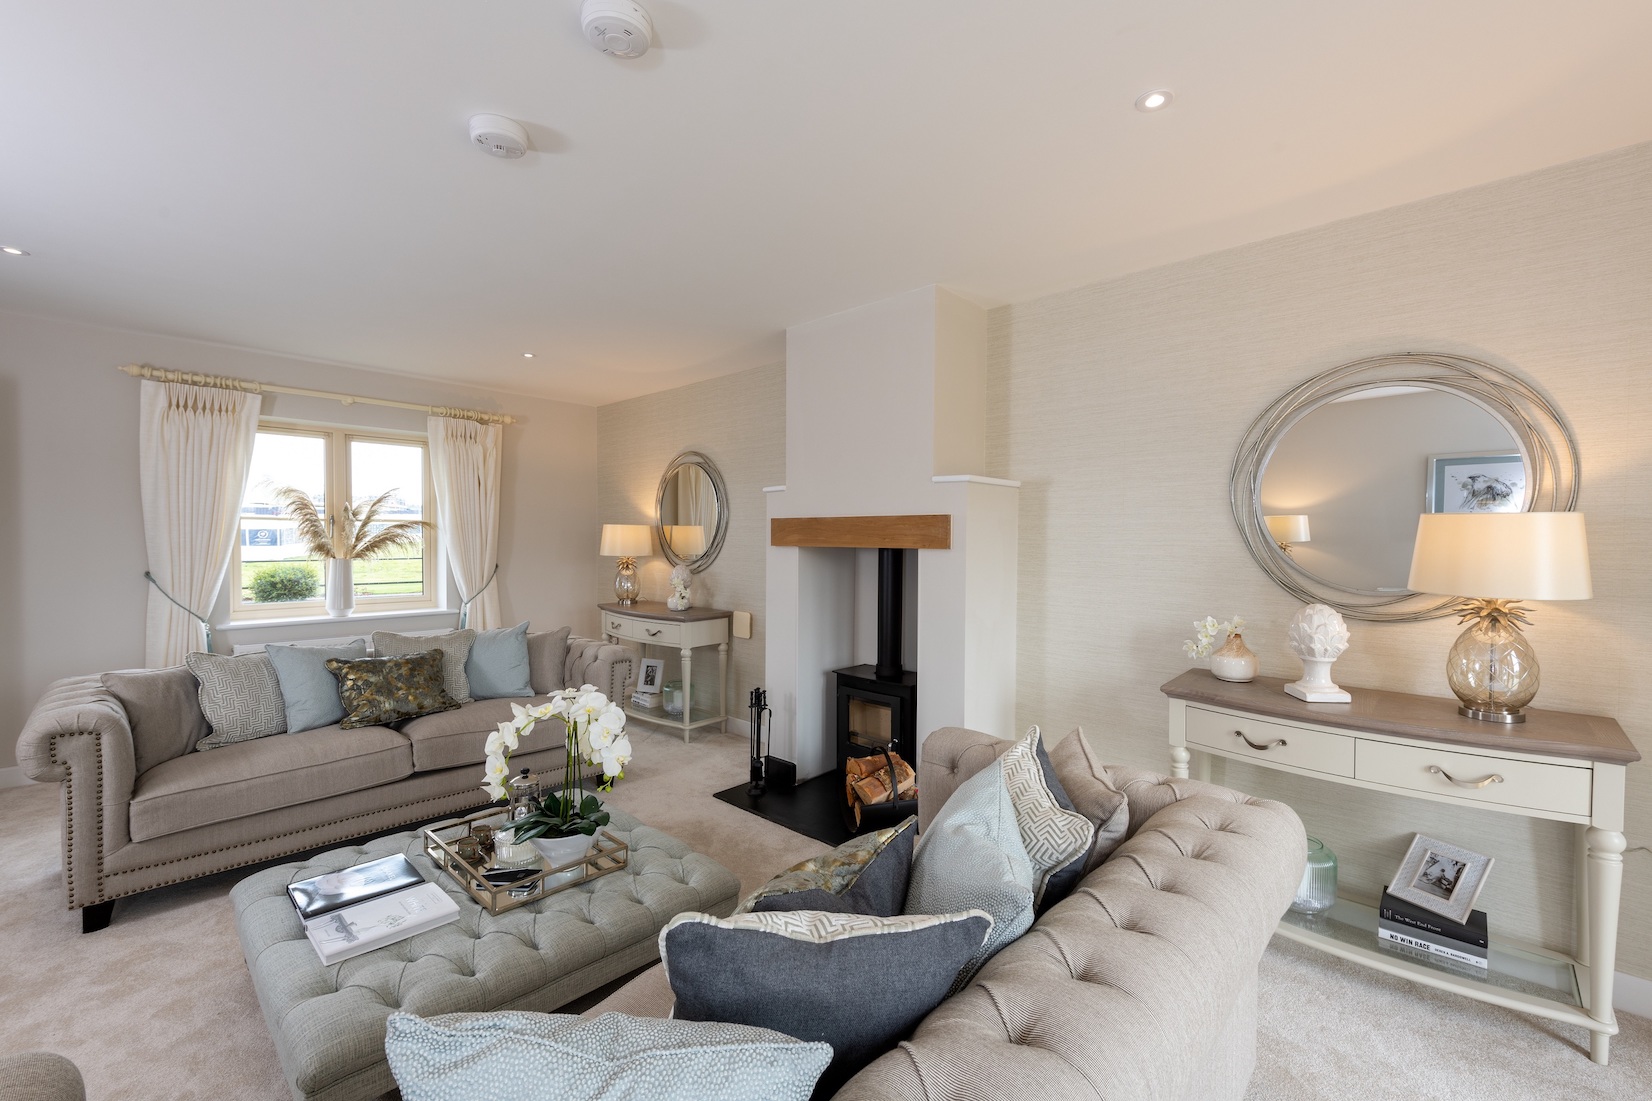 Do you have a spare million to spend on a brand new luxury home? Regardless of the answer, we have an exclusive first look inside a £850,000 luxury home in Maulden Bedfordshire